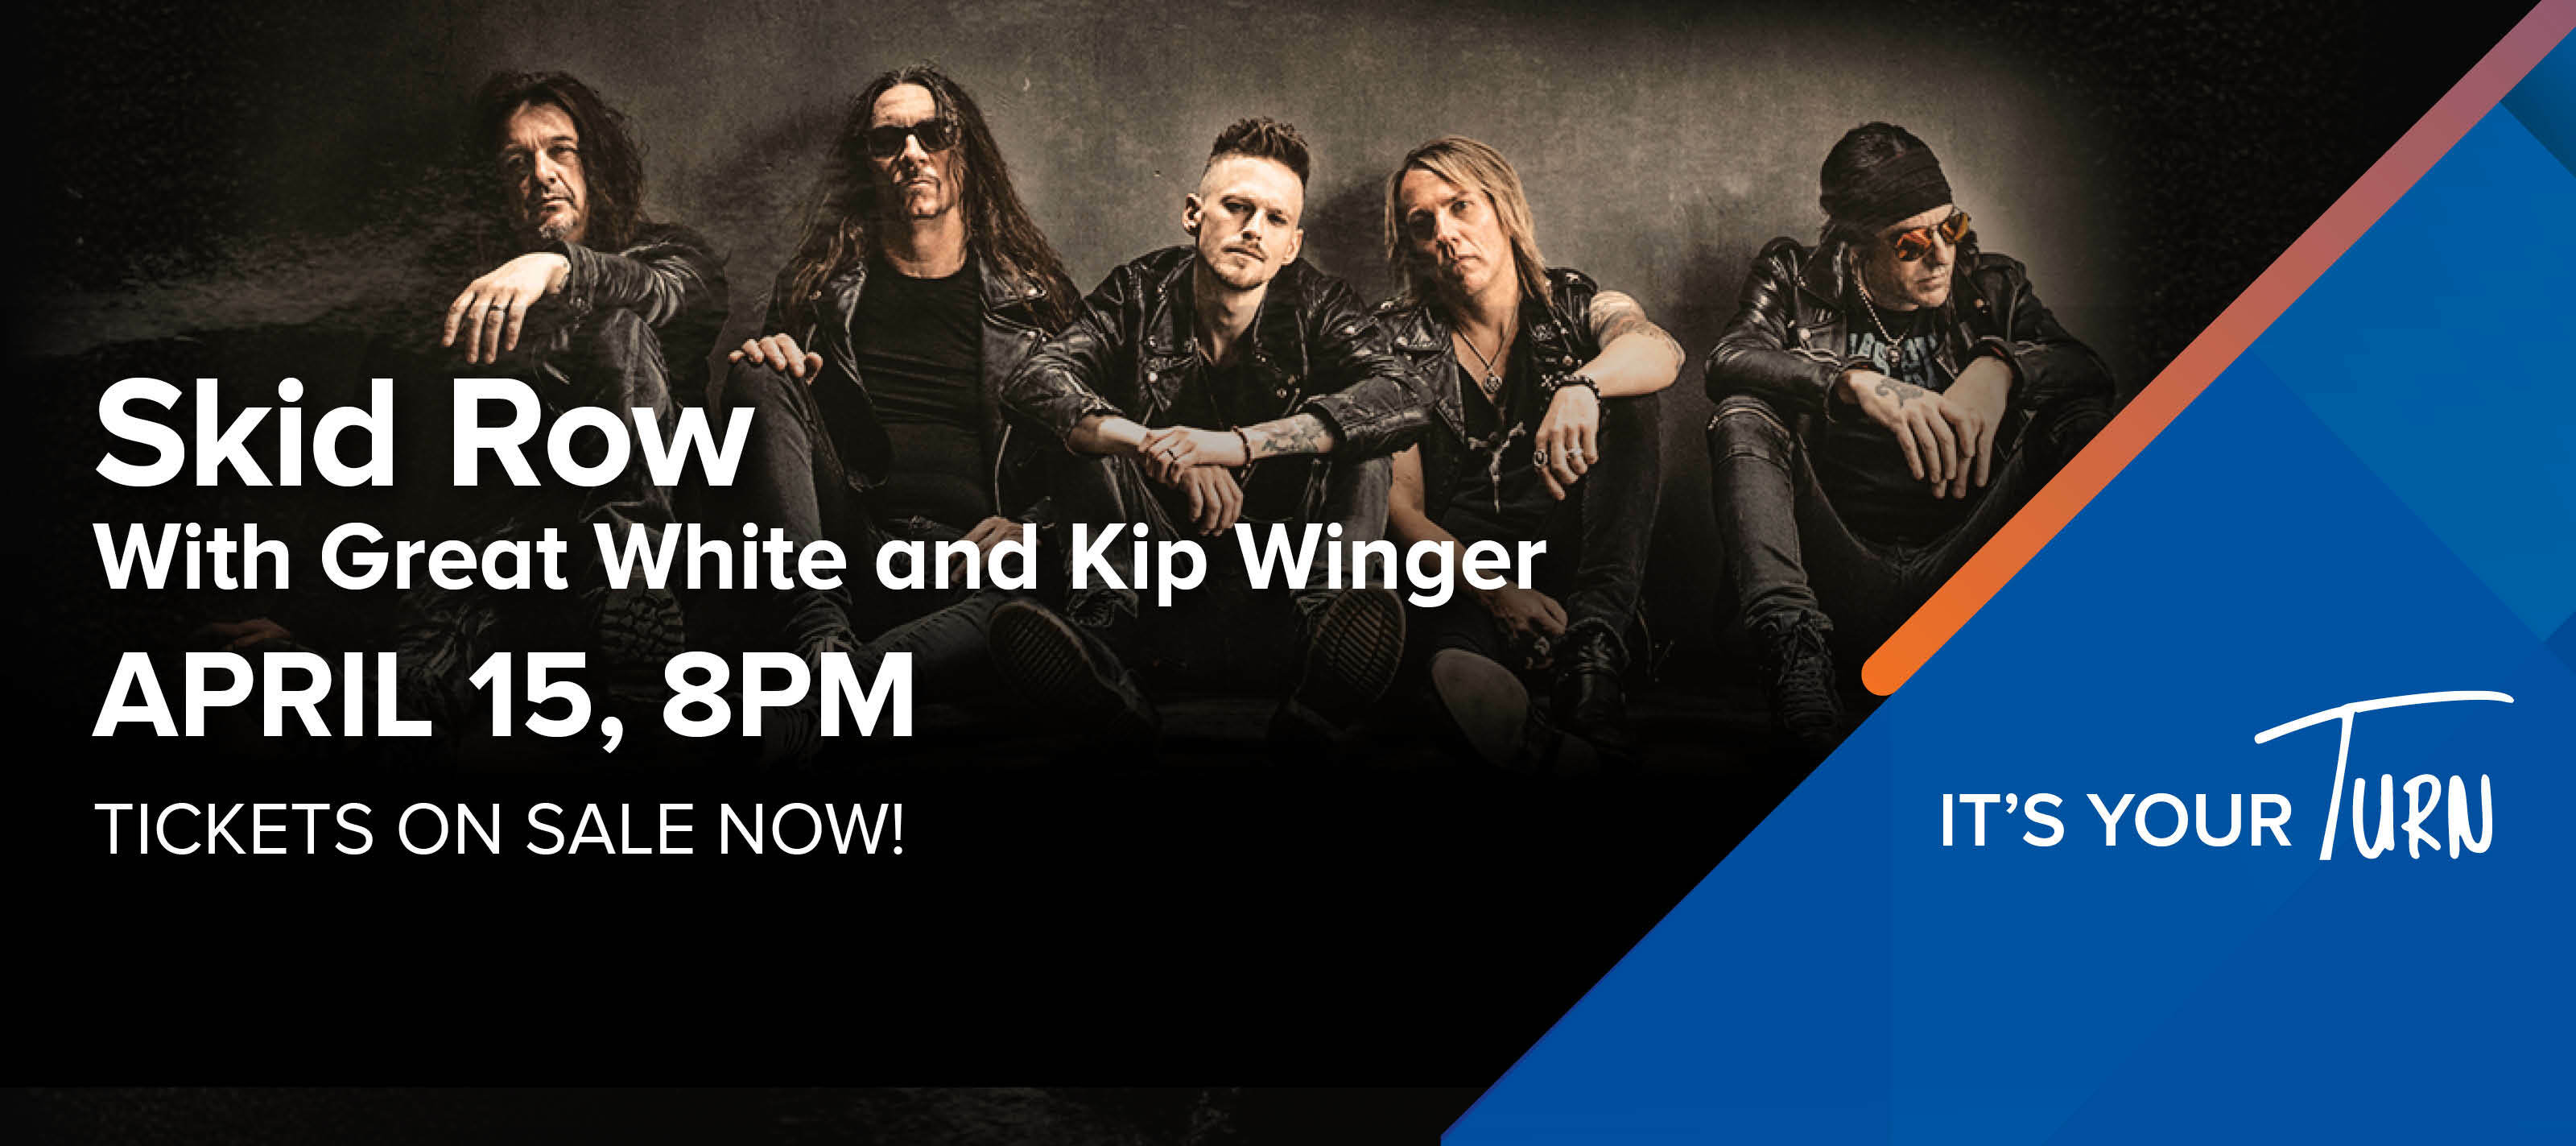 Skid Row with Great White and Kip Winger April 15 8pm Tickets On Sale Now